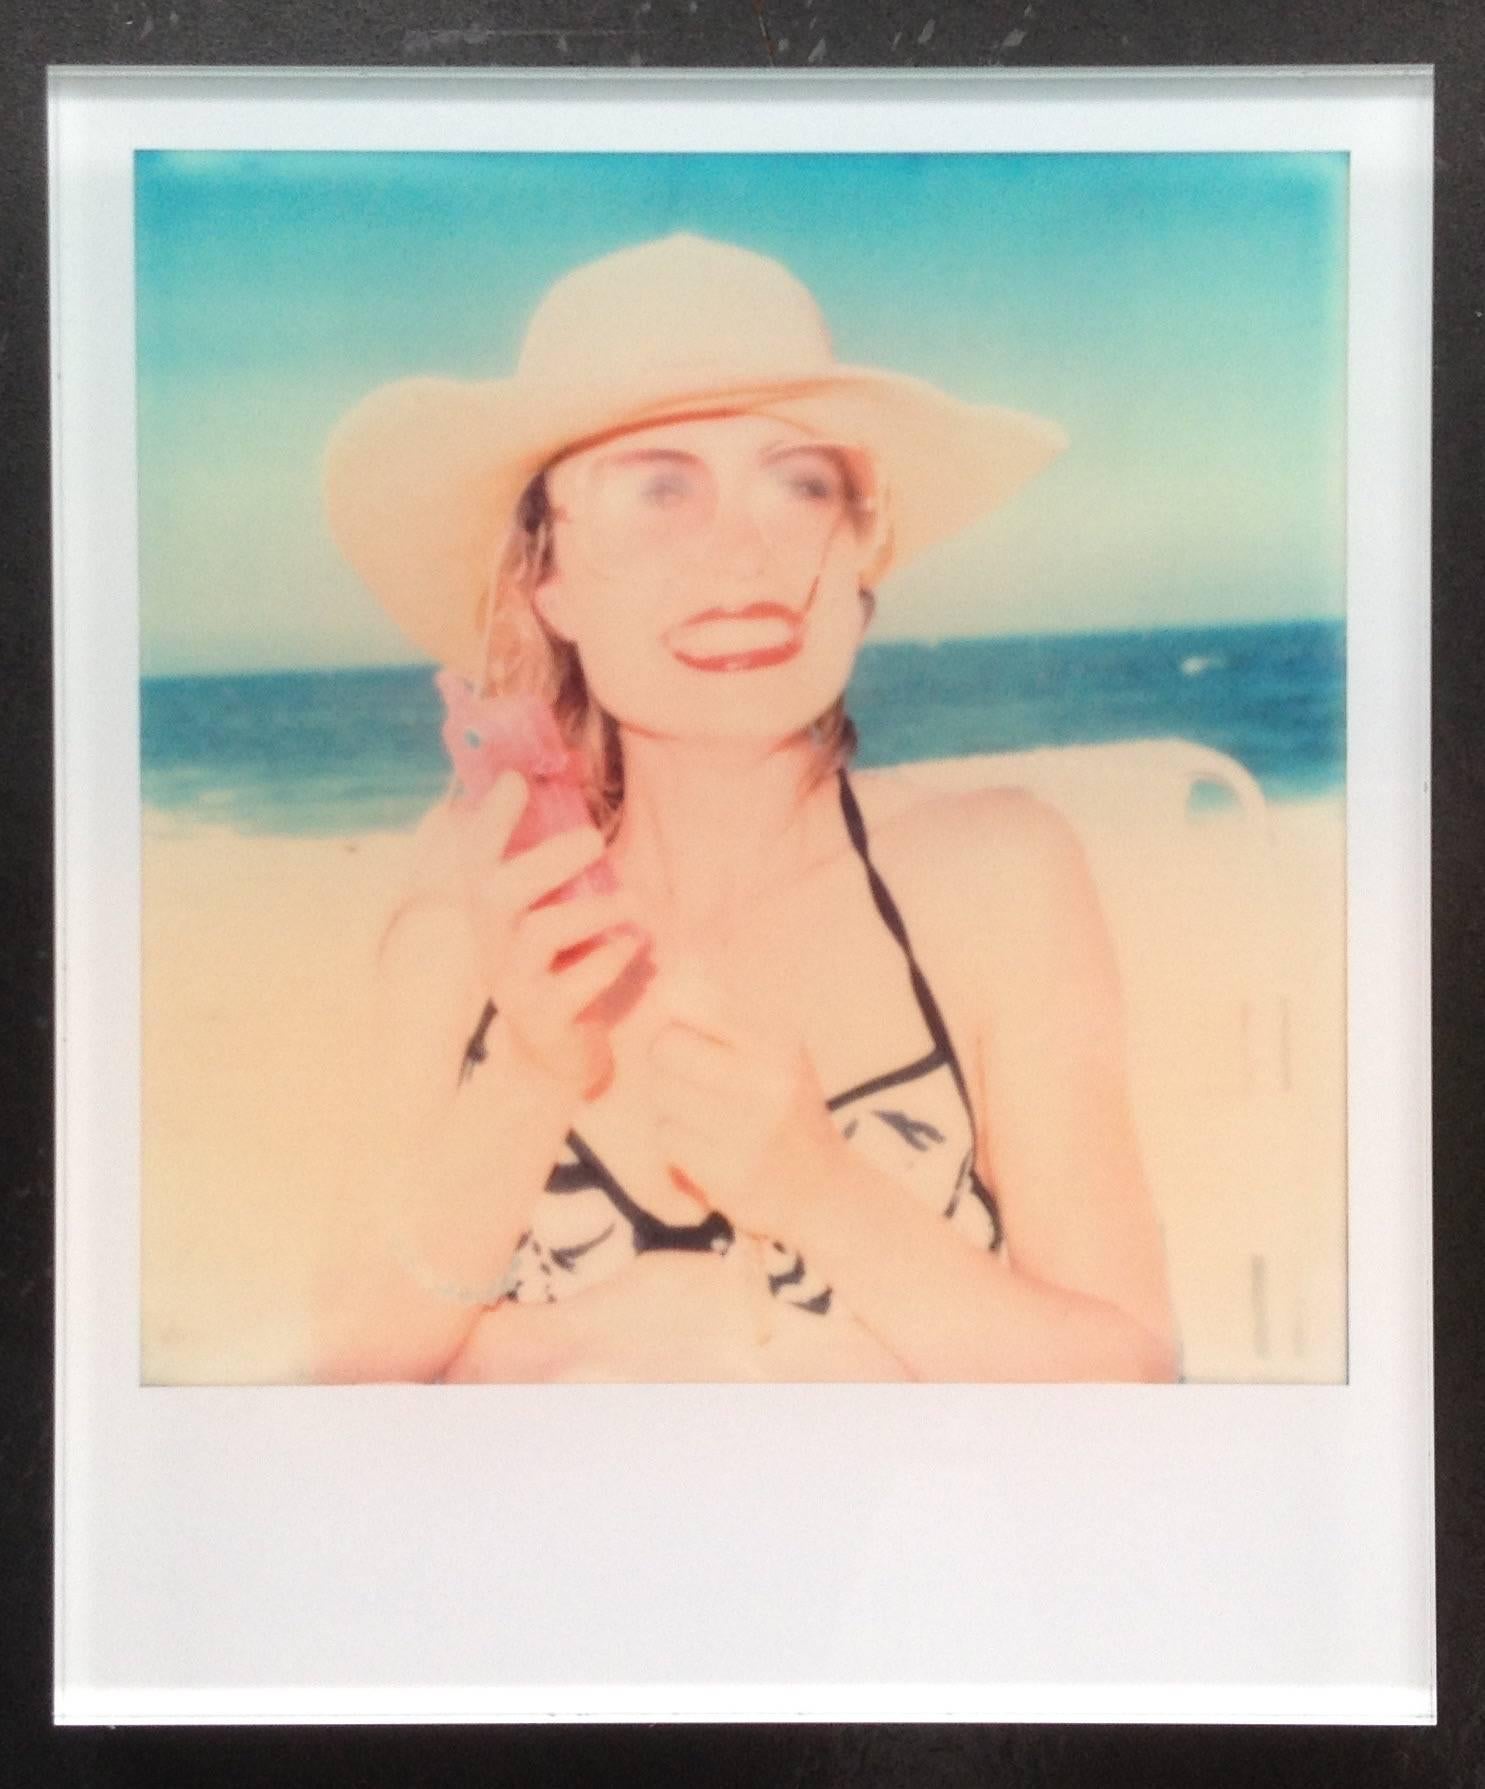 Stefanie Schneider's Minis

'Untitled #11' (Beachshoot) featuring Radha Mitchell, 2005
signed and signature brand on verso
Lambda digital Color Photographs based on a Polaroid

Polaroid sized open Editions 1999-2013
10.7 x 8.8cm (Image